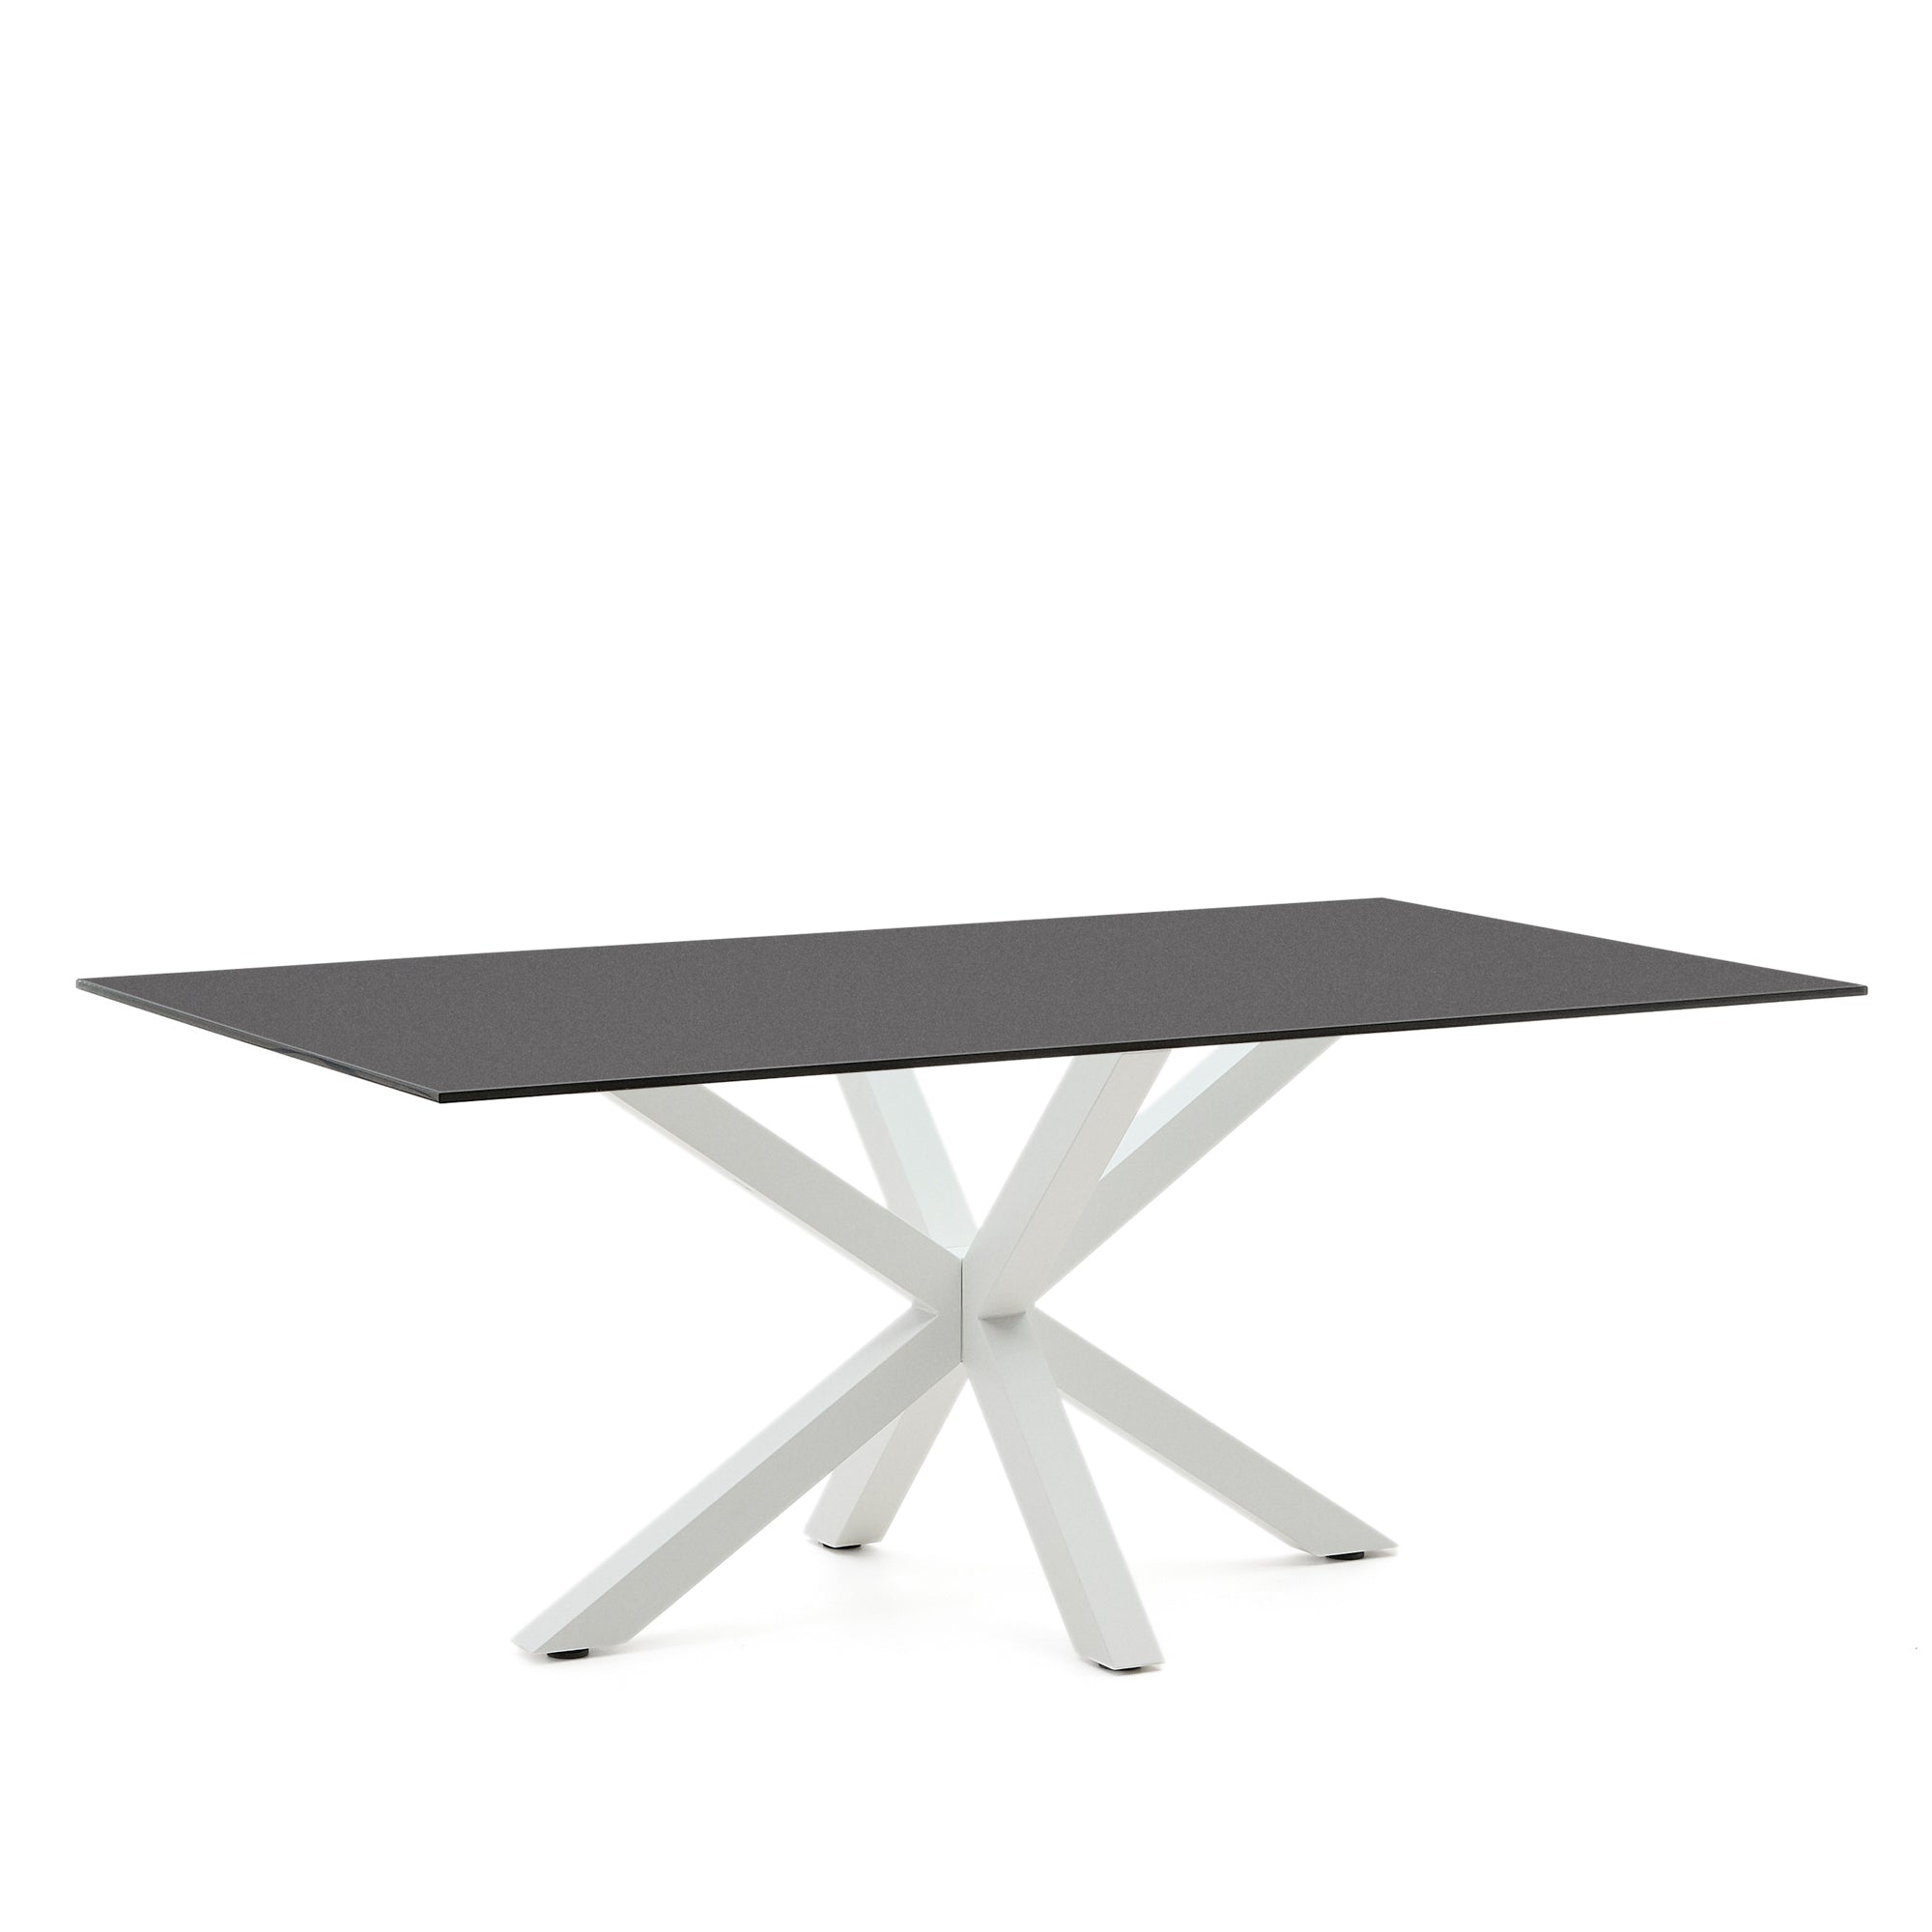 Argo table with frosted black glass and steel legs, black finish, 200 x 100 cm